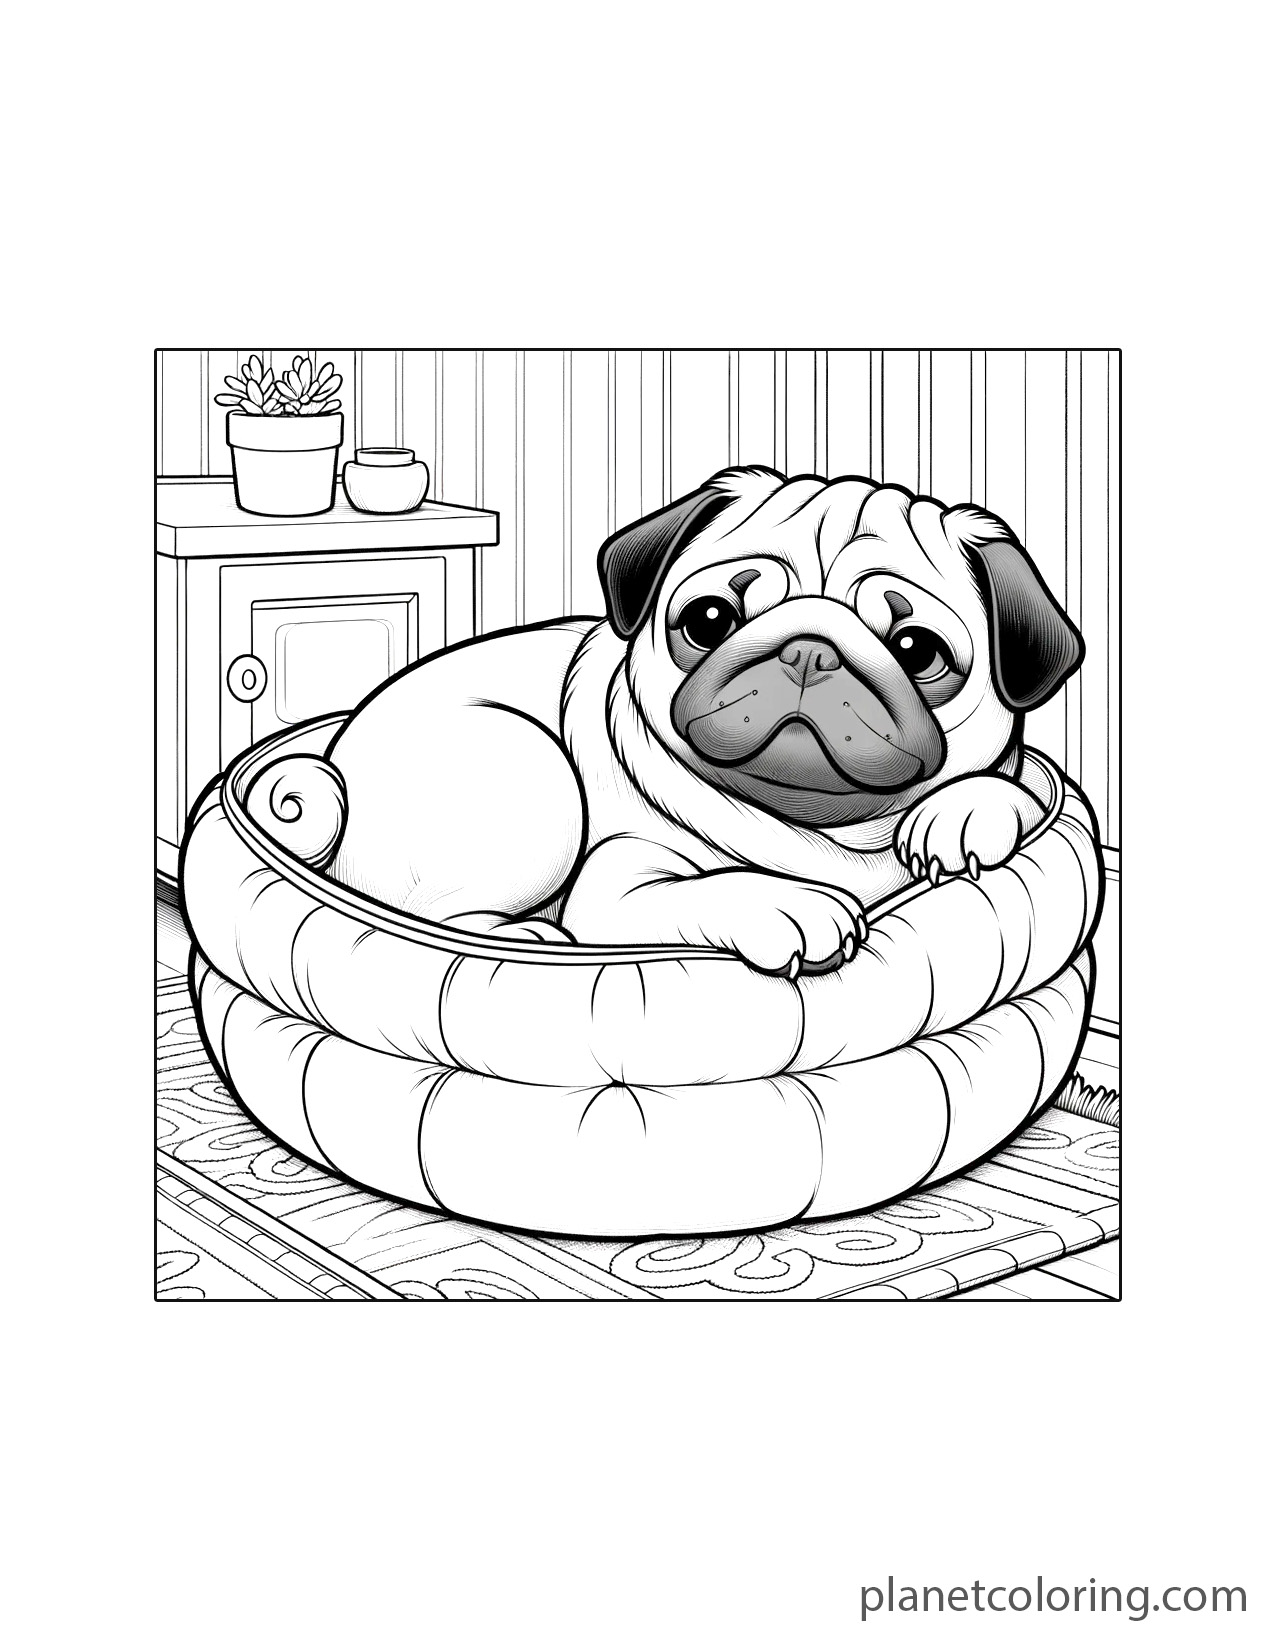 Pug in a cushioned dog bed